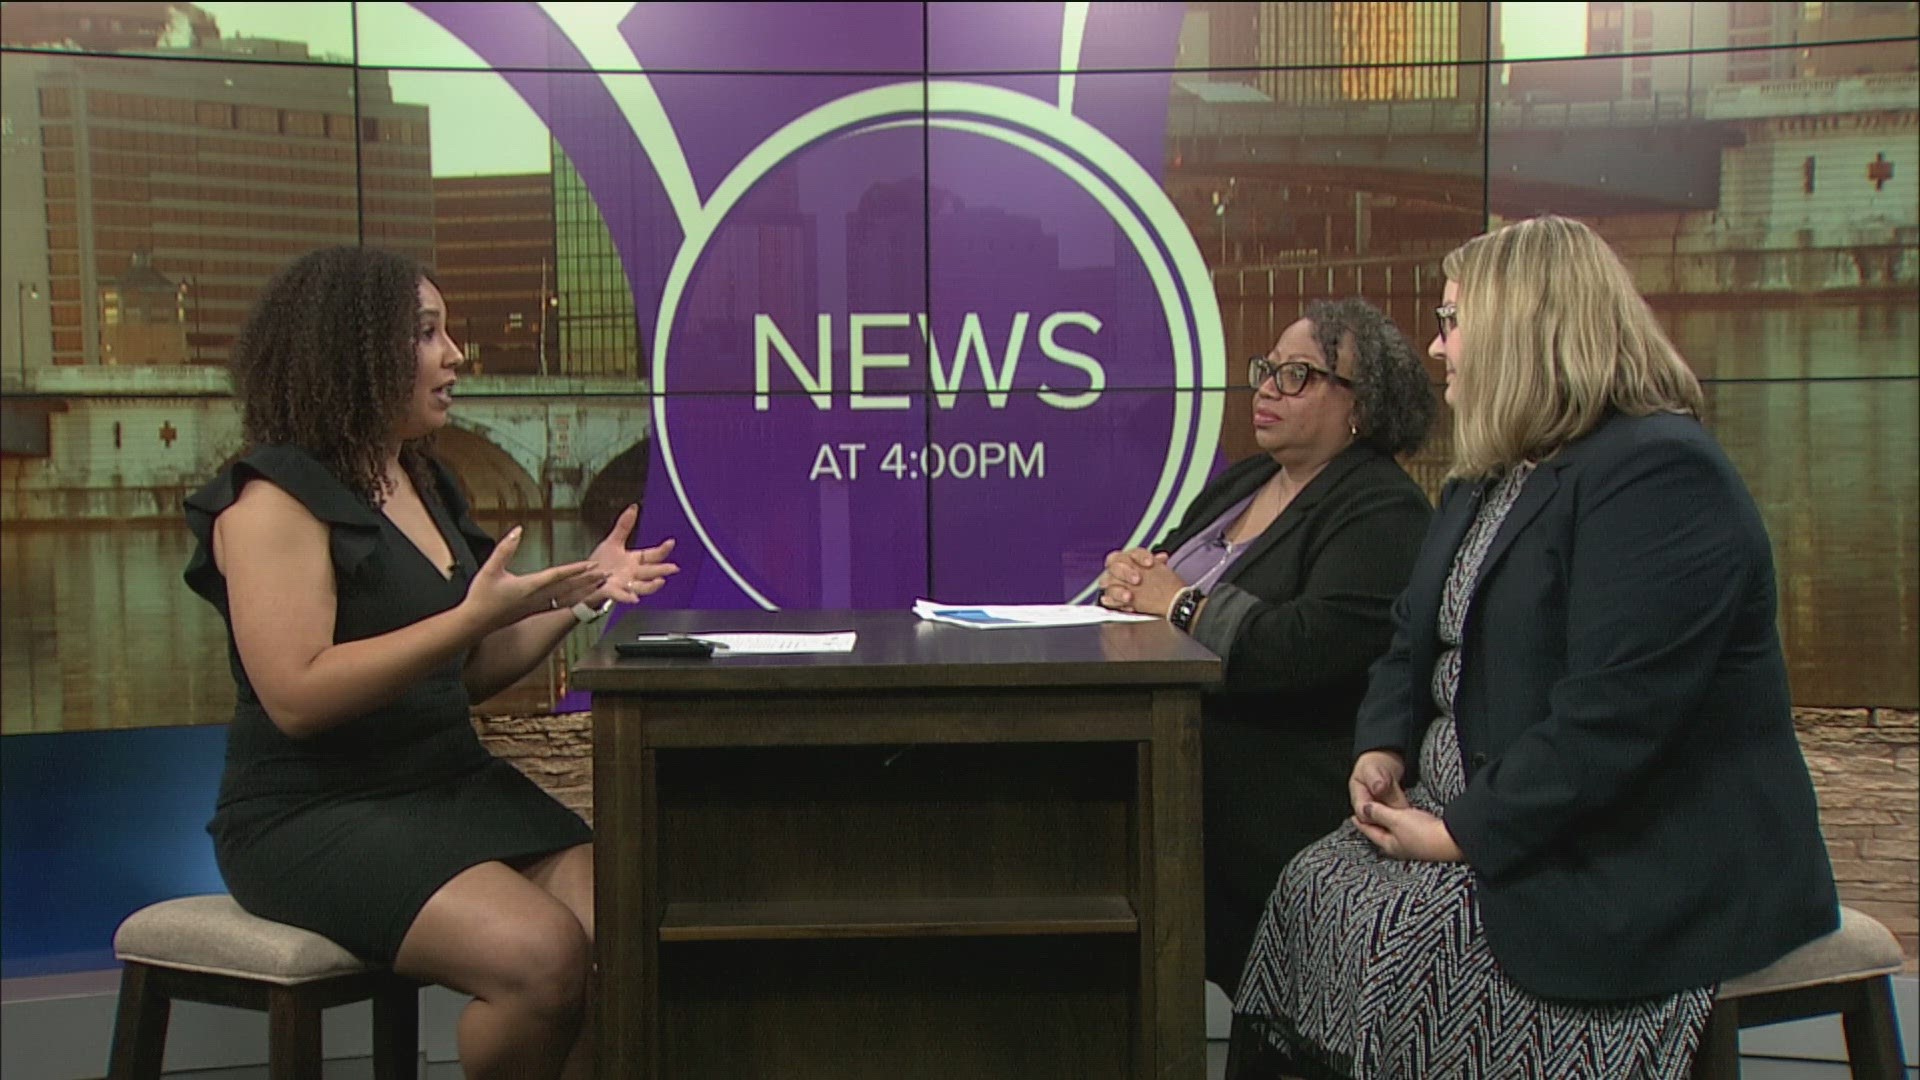 Coleena Ali, with the City of Toledo's Tenant and Landlord Services, and Veronica Martinez, with Legal Aid of Western Ohio, talk about navigating housing issues.